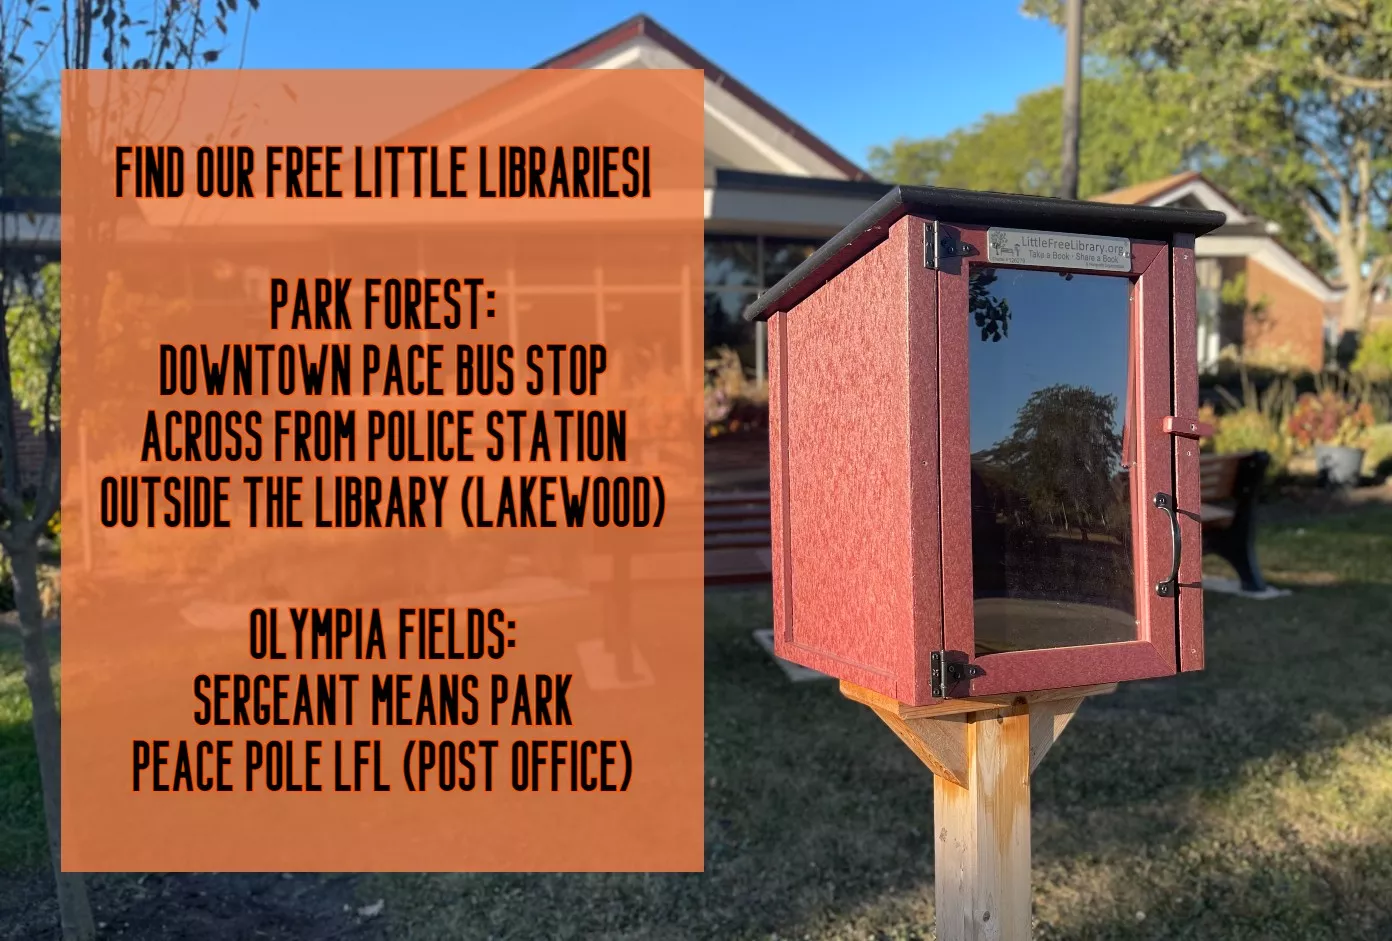 Little Free Libraries in Park Forest: Downtown Pace Bus Stop, Across from Police Station, and Outside the Library (Lakewood side).  Little Free Libraries in Olympia Fields: Sergeant Means Park and Peace Pole outside the Post Office.